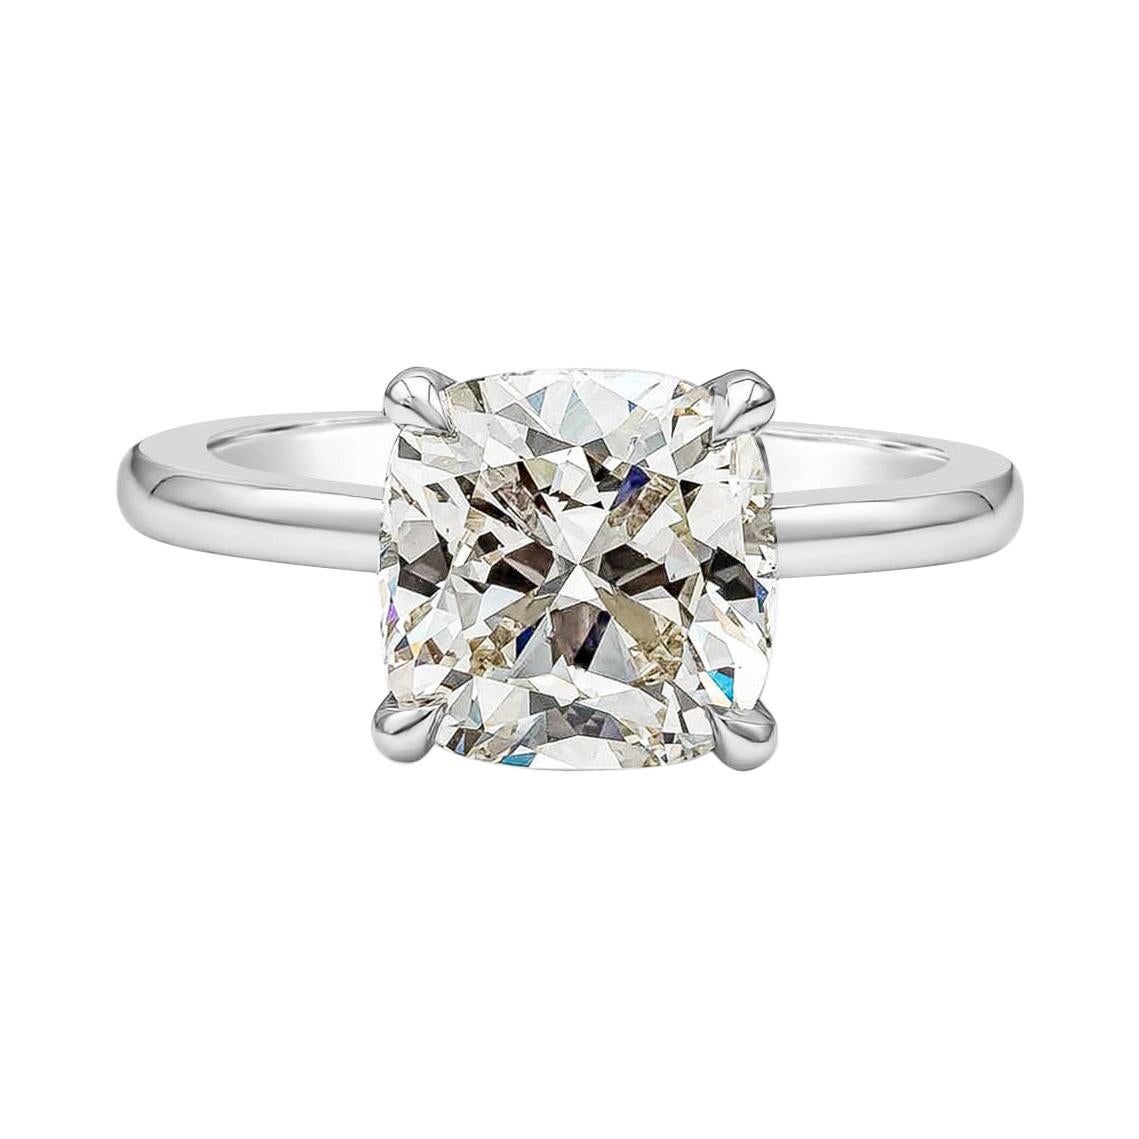 GIA Certified 3.06 Carat Cushion Cut Diamond Solitaire Engagement Ring